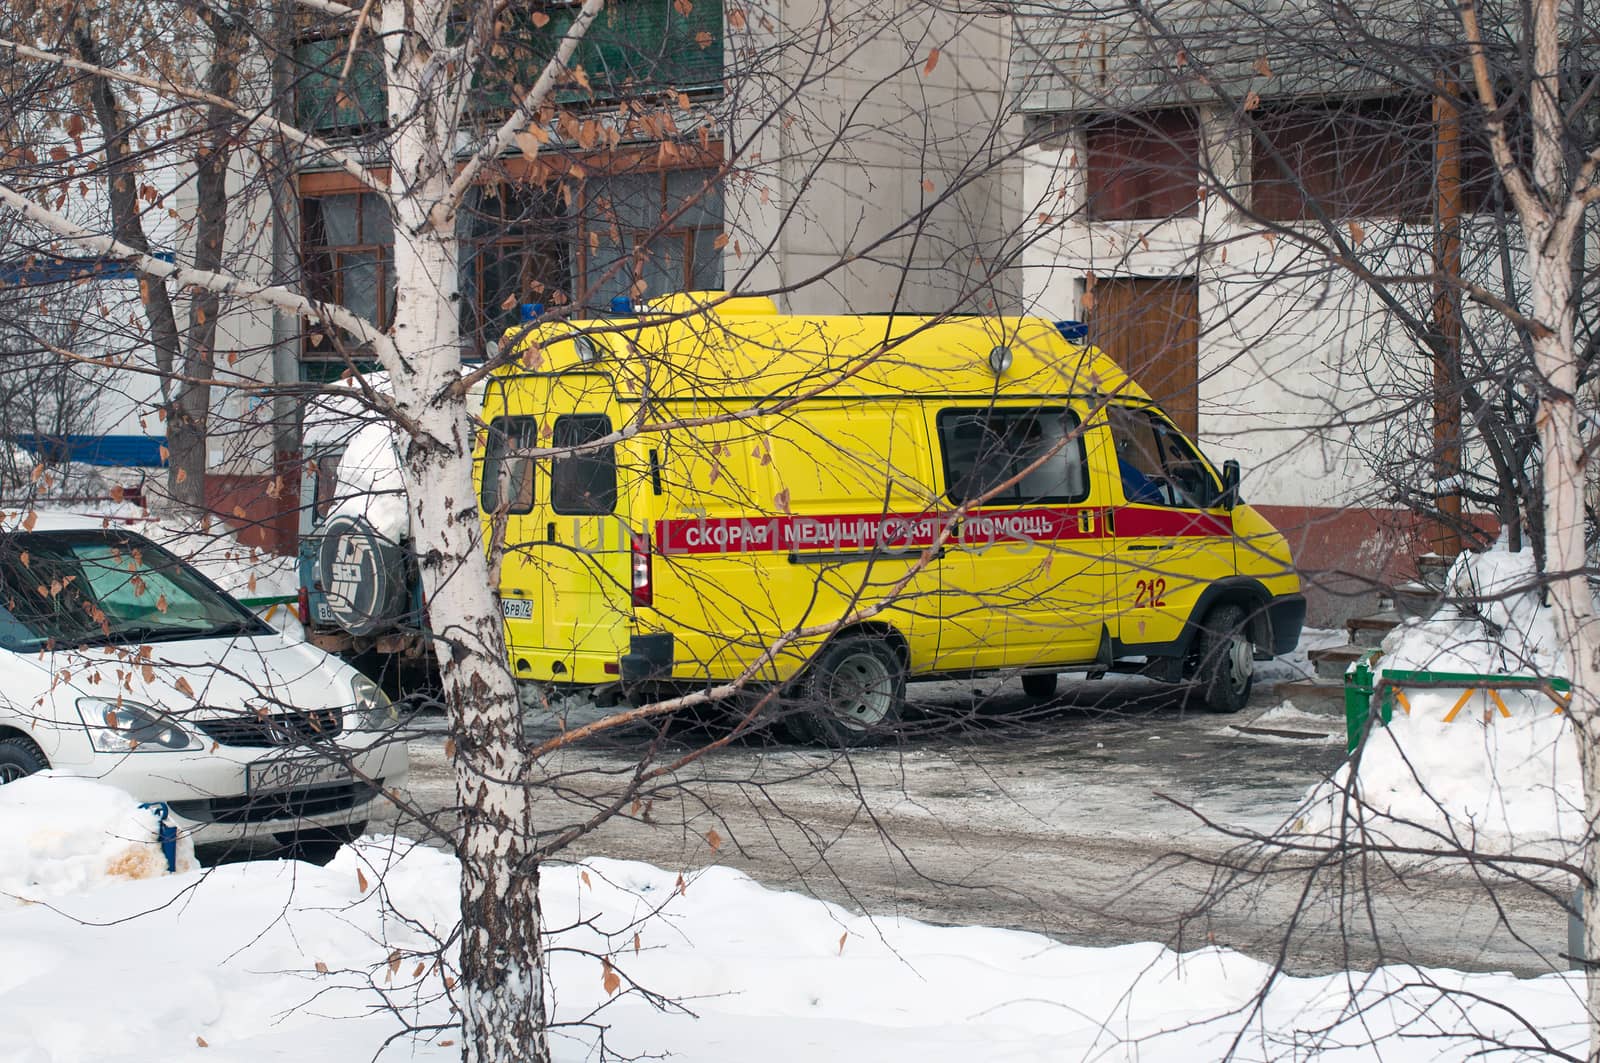 The yellow car of an emergency medical service costs at a house  by veronka72